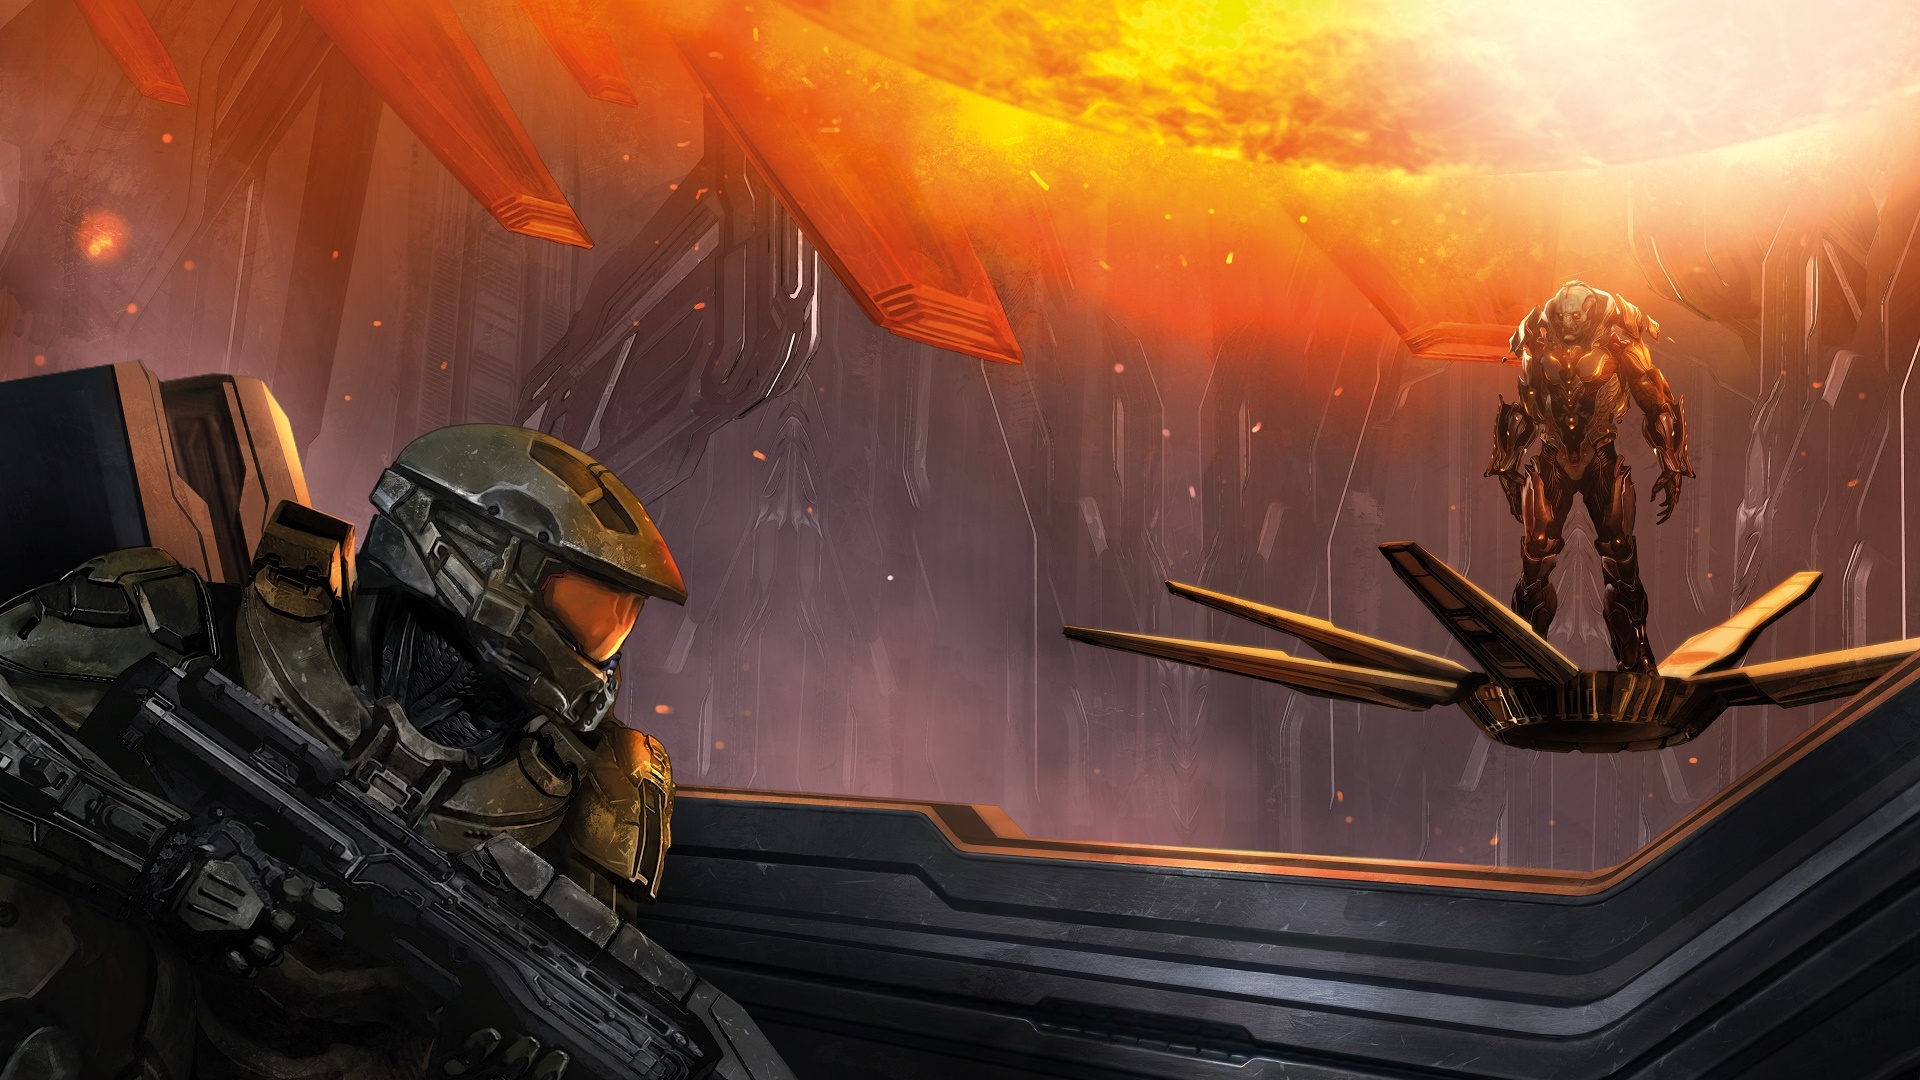 Halo Mythos art by Benjamin Carre of the Didact's awakening in Halo 4